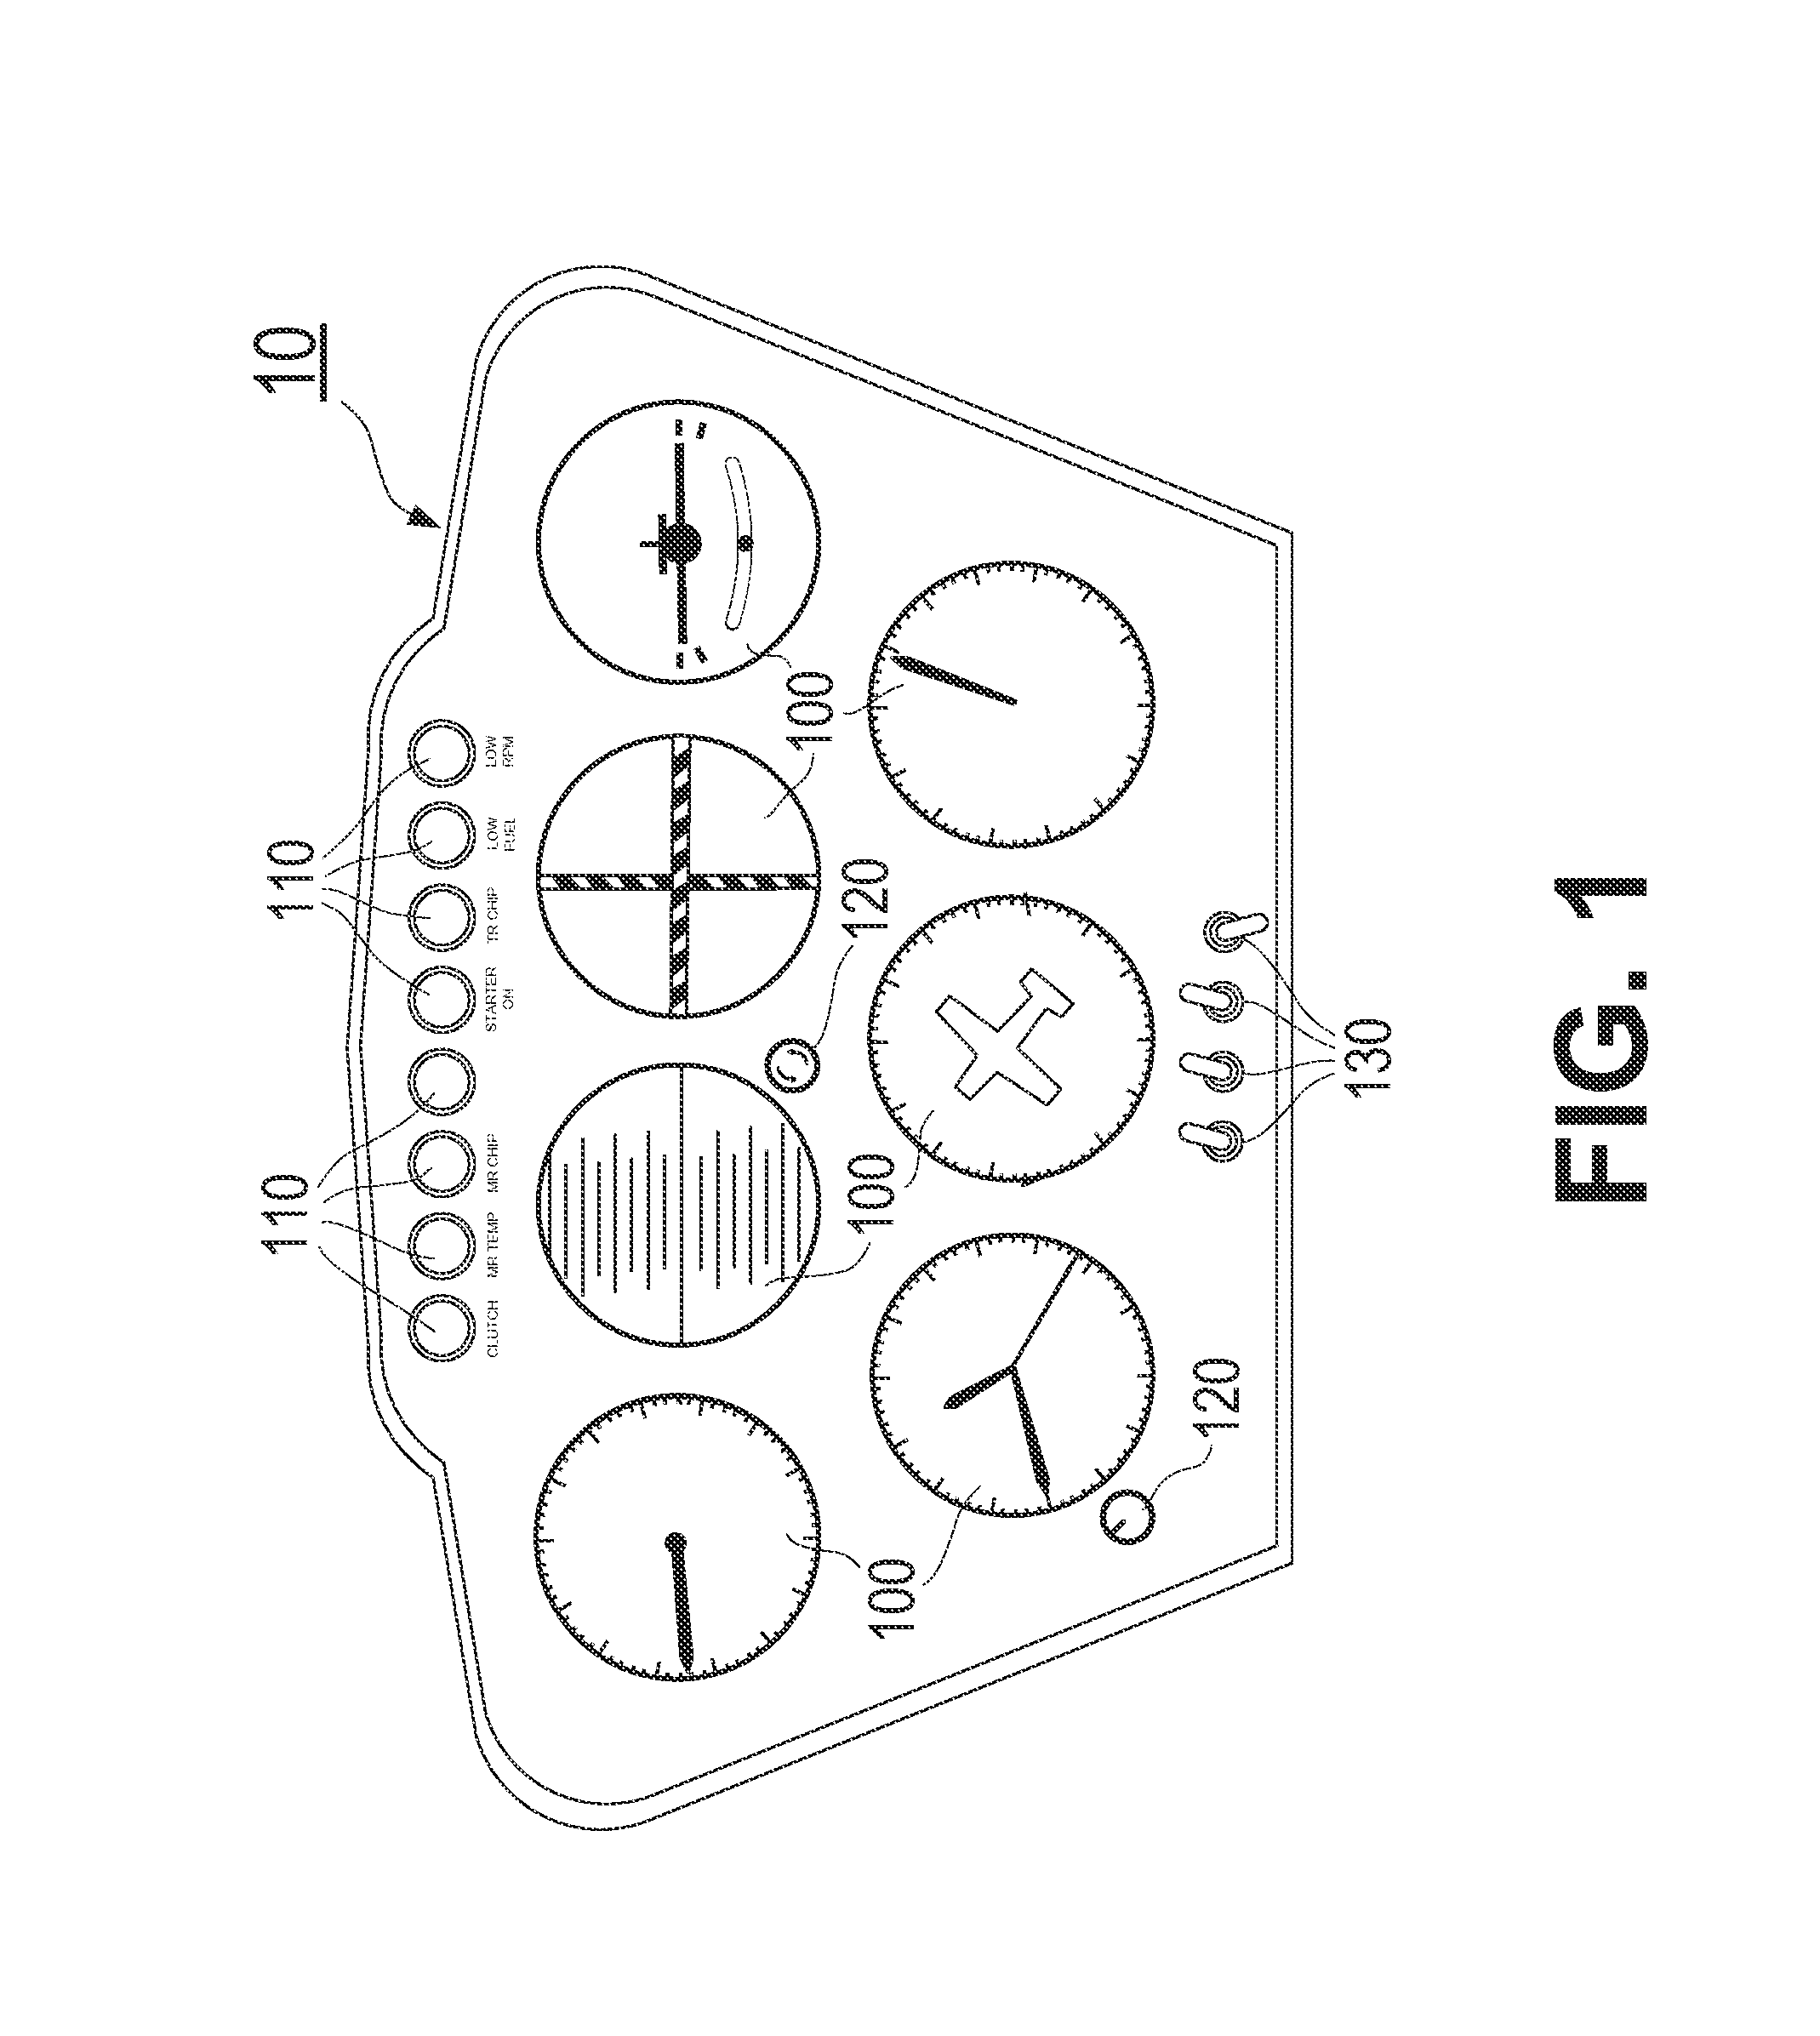 Optical image monitoring system and method for unmanned aerial vehicles